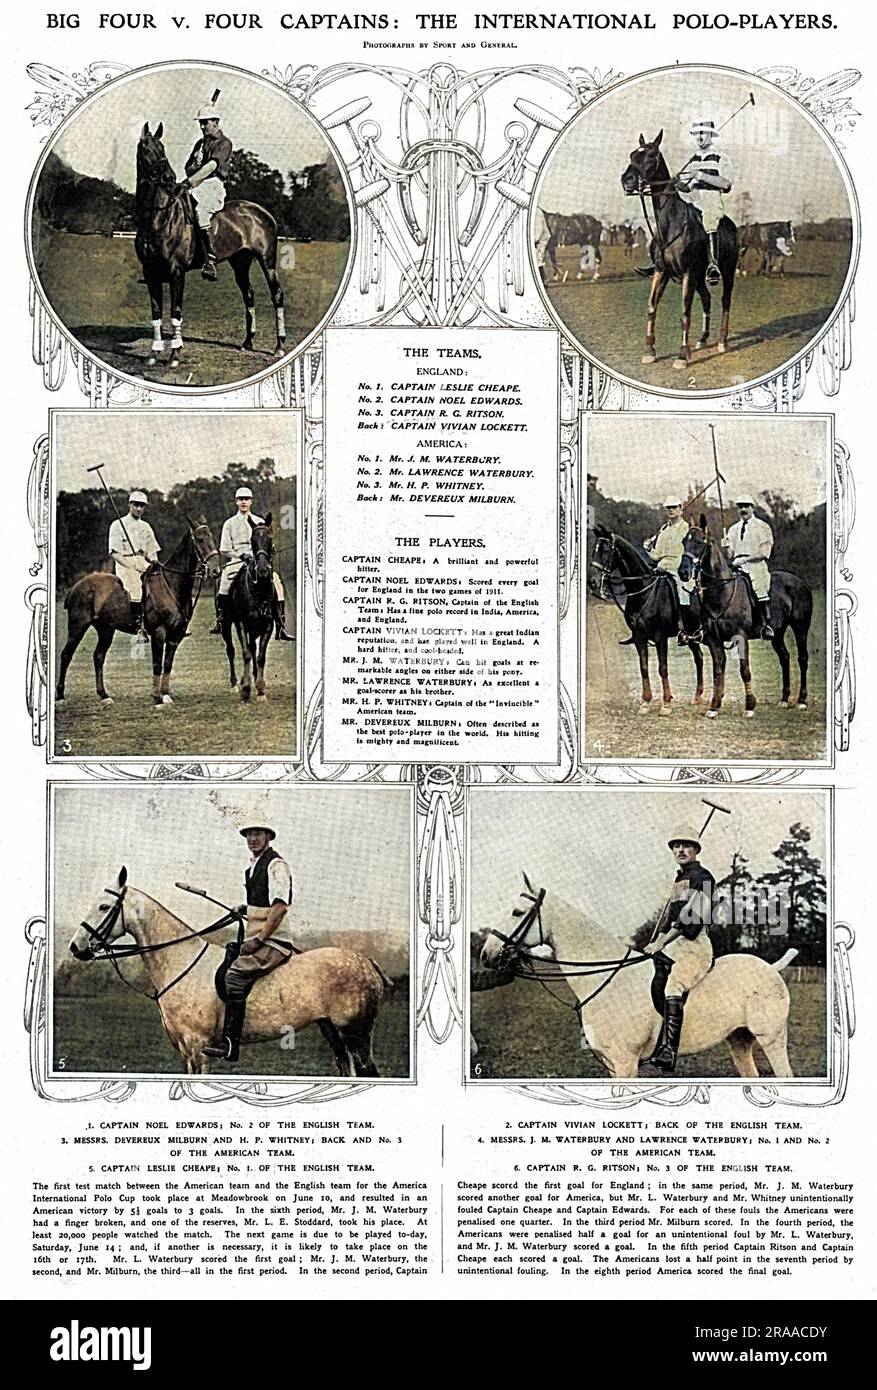 The British and American polo teams who played in the International Polo Trophy (Westchester Cup) in 1913.  The American team were known as the 'Big Four' and were J. M. Waterburyl, Lawrence Waterbury, H. P. Whitney and Mr Devereux Milburn.  The England team were Captain Leslie St Clair Cheape, Captain Noel Edwards, Captain R. G. Ritson and Captain Vivian Lockett.  The Americans won a narrow victory and the following year, England managed a famous victory against the USA a few months before the outbreak of the First World War.  Captain Cheape, described here as 'a brilliant and powerful hitter Stock Photo